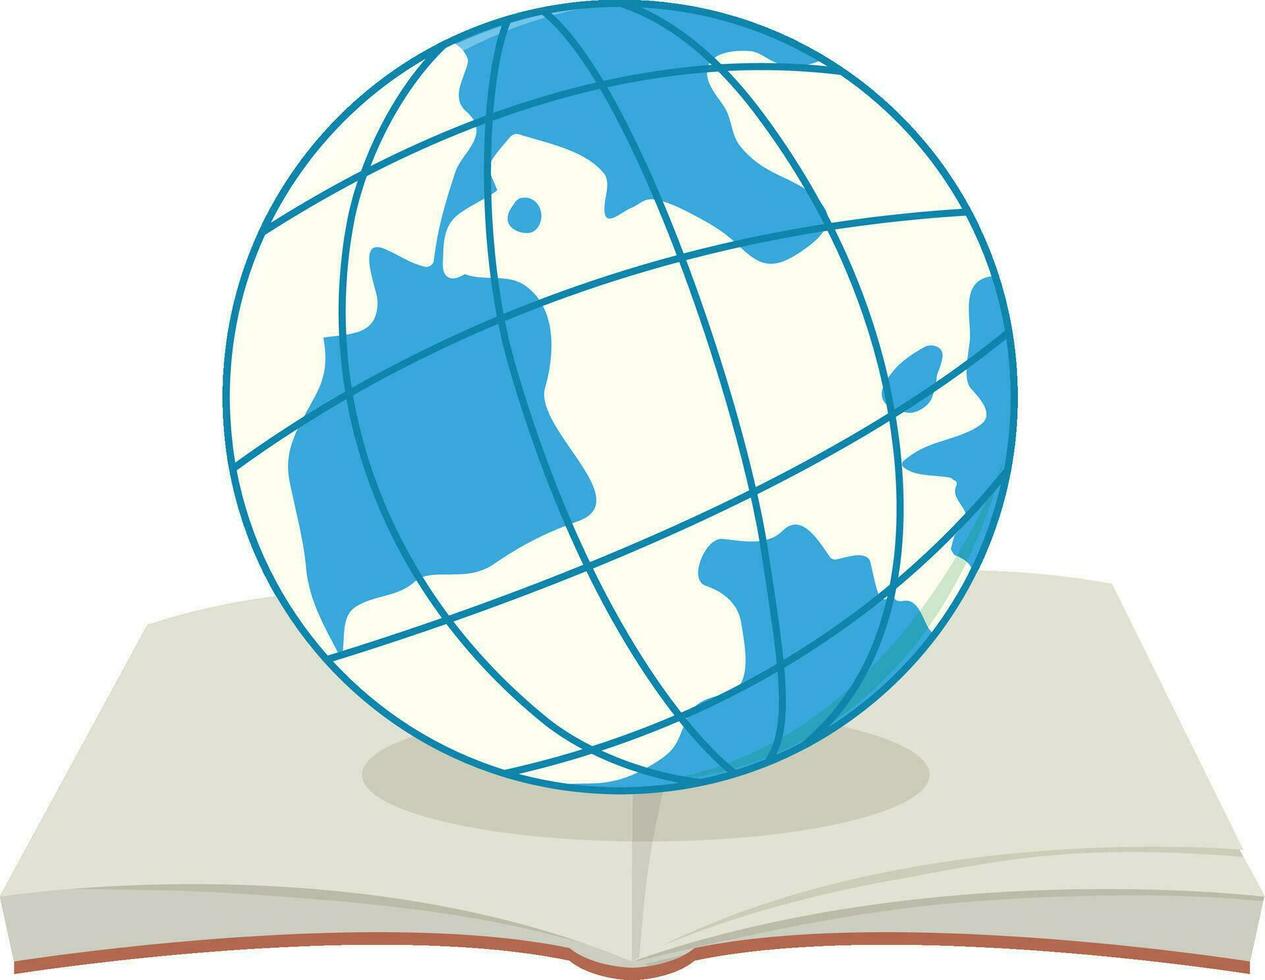 World globe and book open on white background vector